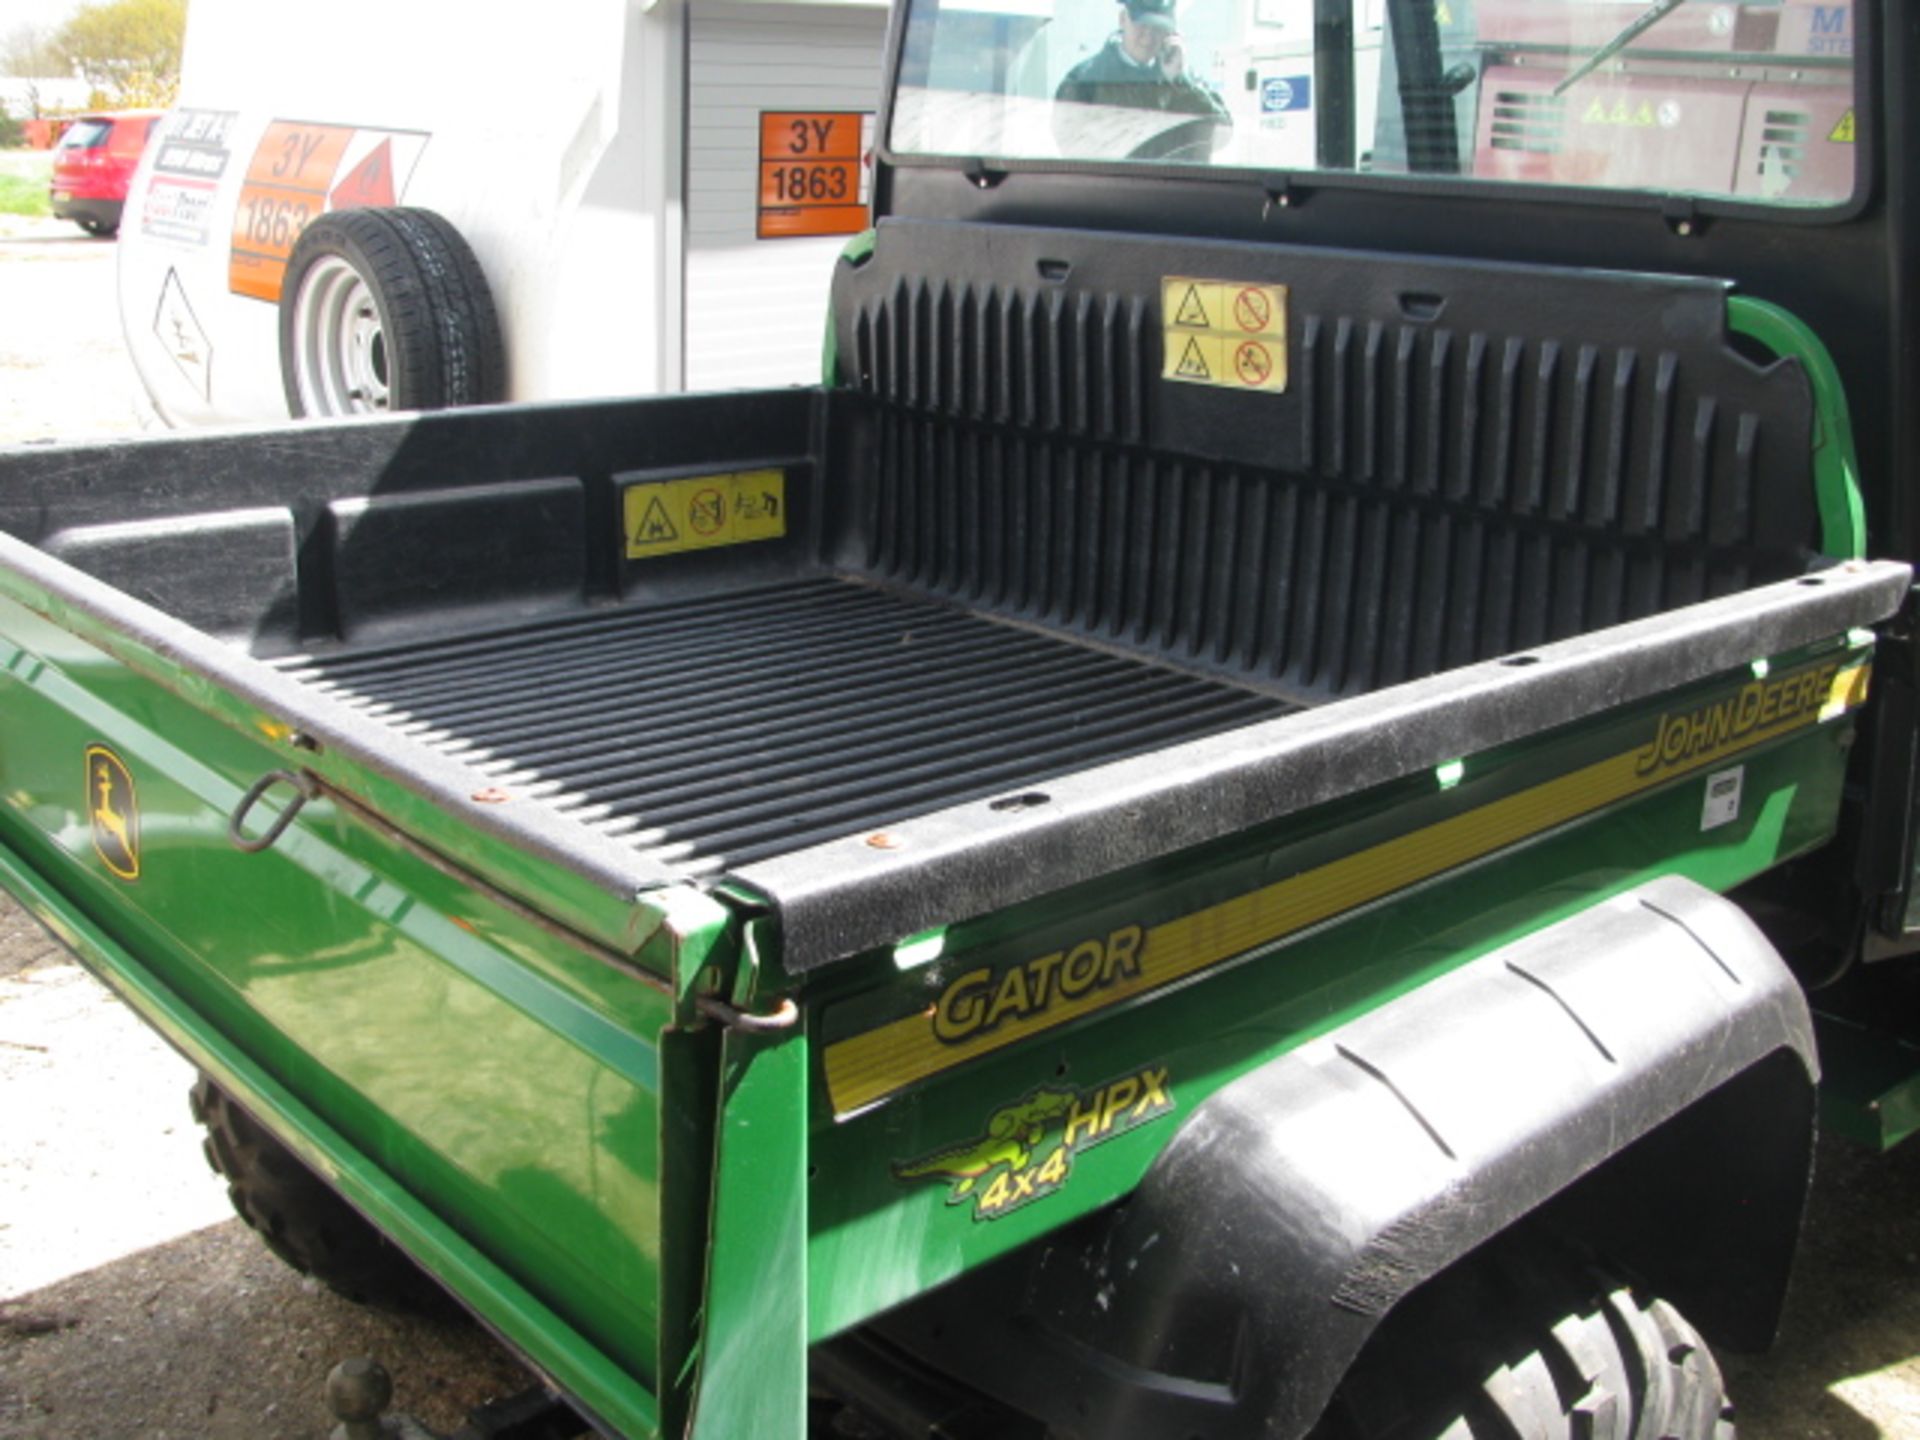 John Deere HPX gaitor 4 x 4 tipping bed utility vehicle (highway spec) - Image 3 of 8